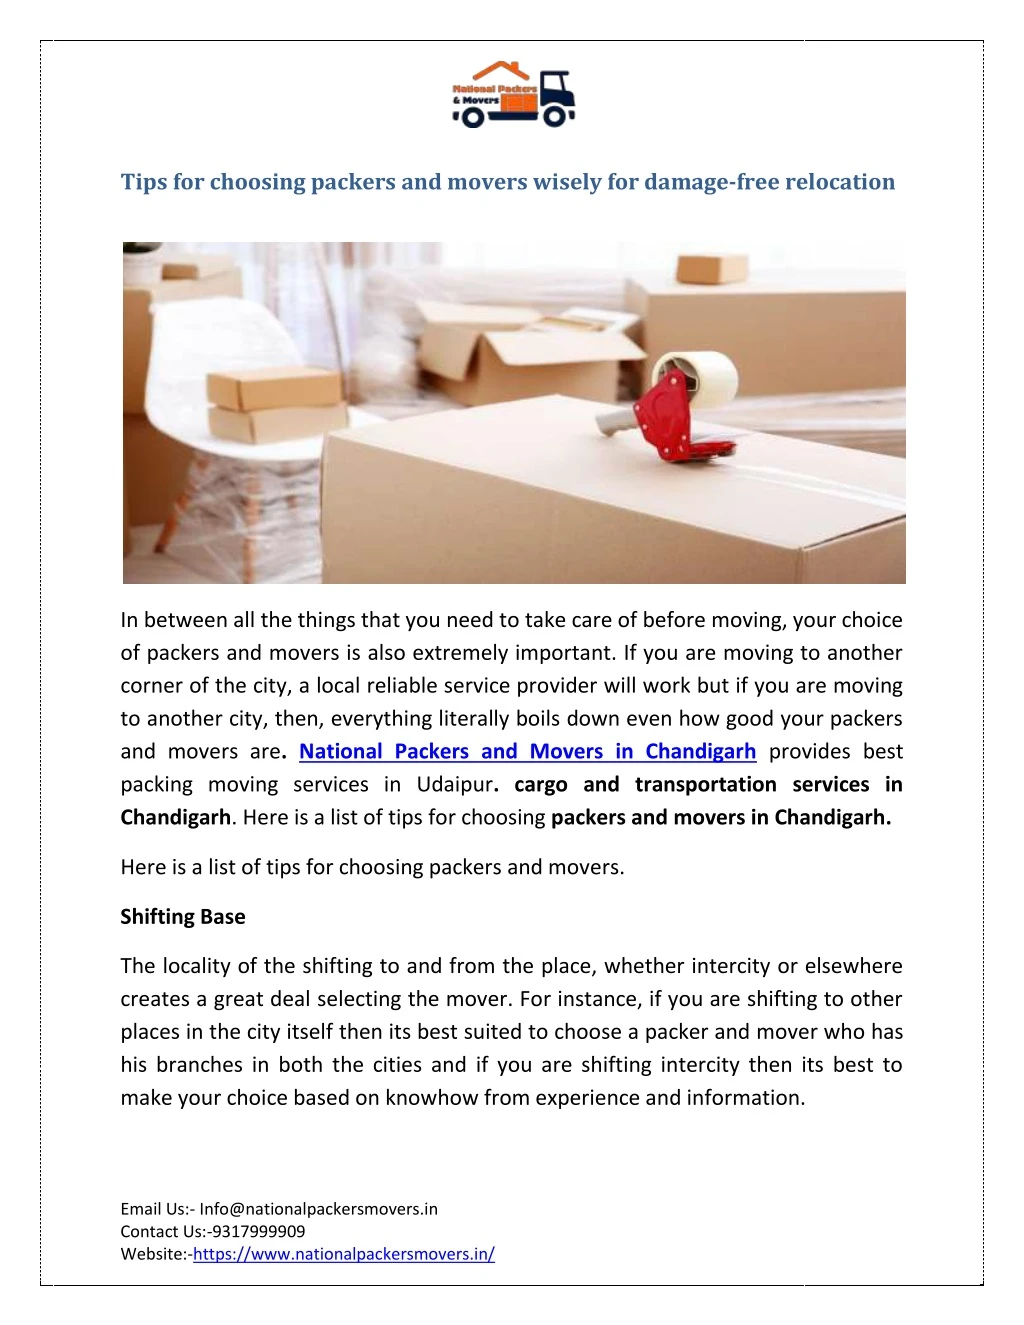 tips for choosing packers and movers wisely